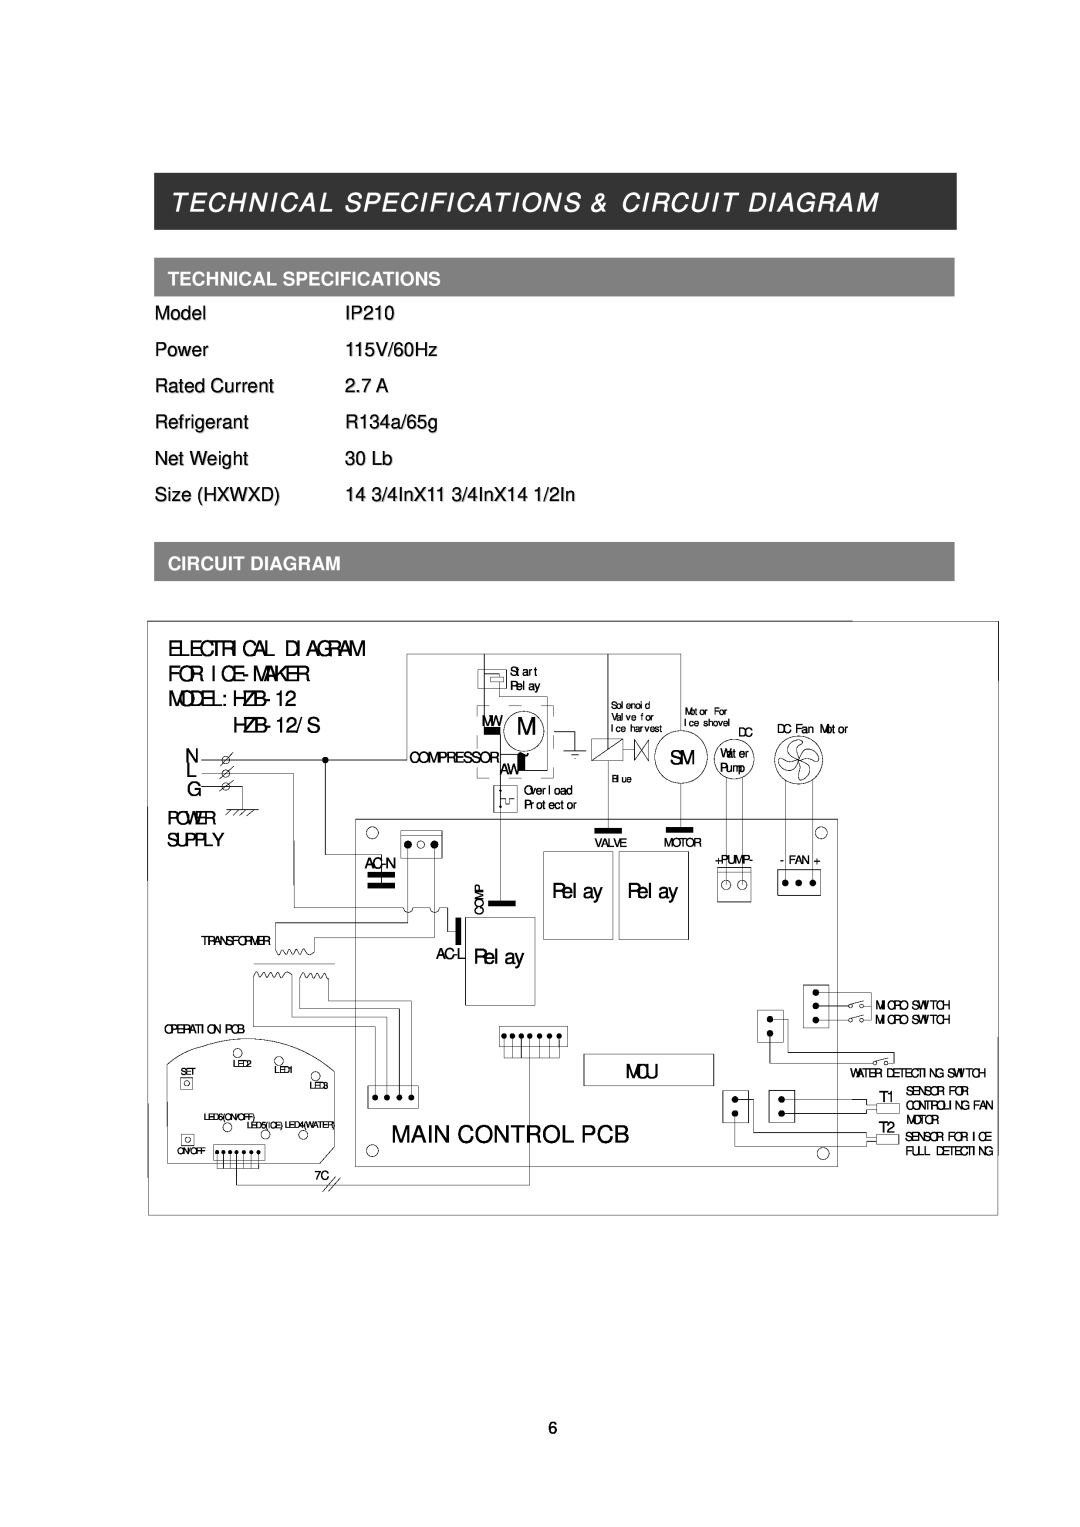 EdgeStar Technical Specifications & Circuit Diagram, Main Control Pcb, For I Ce- Maker, Model Hzb, HZB- 12/ S, Rel ay 